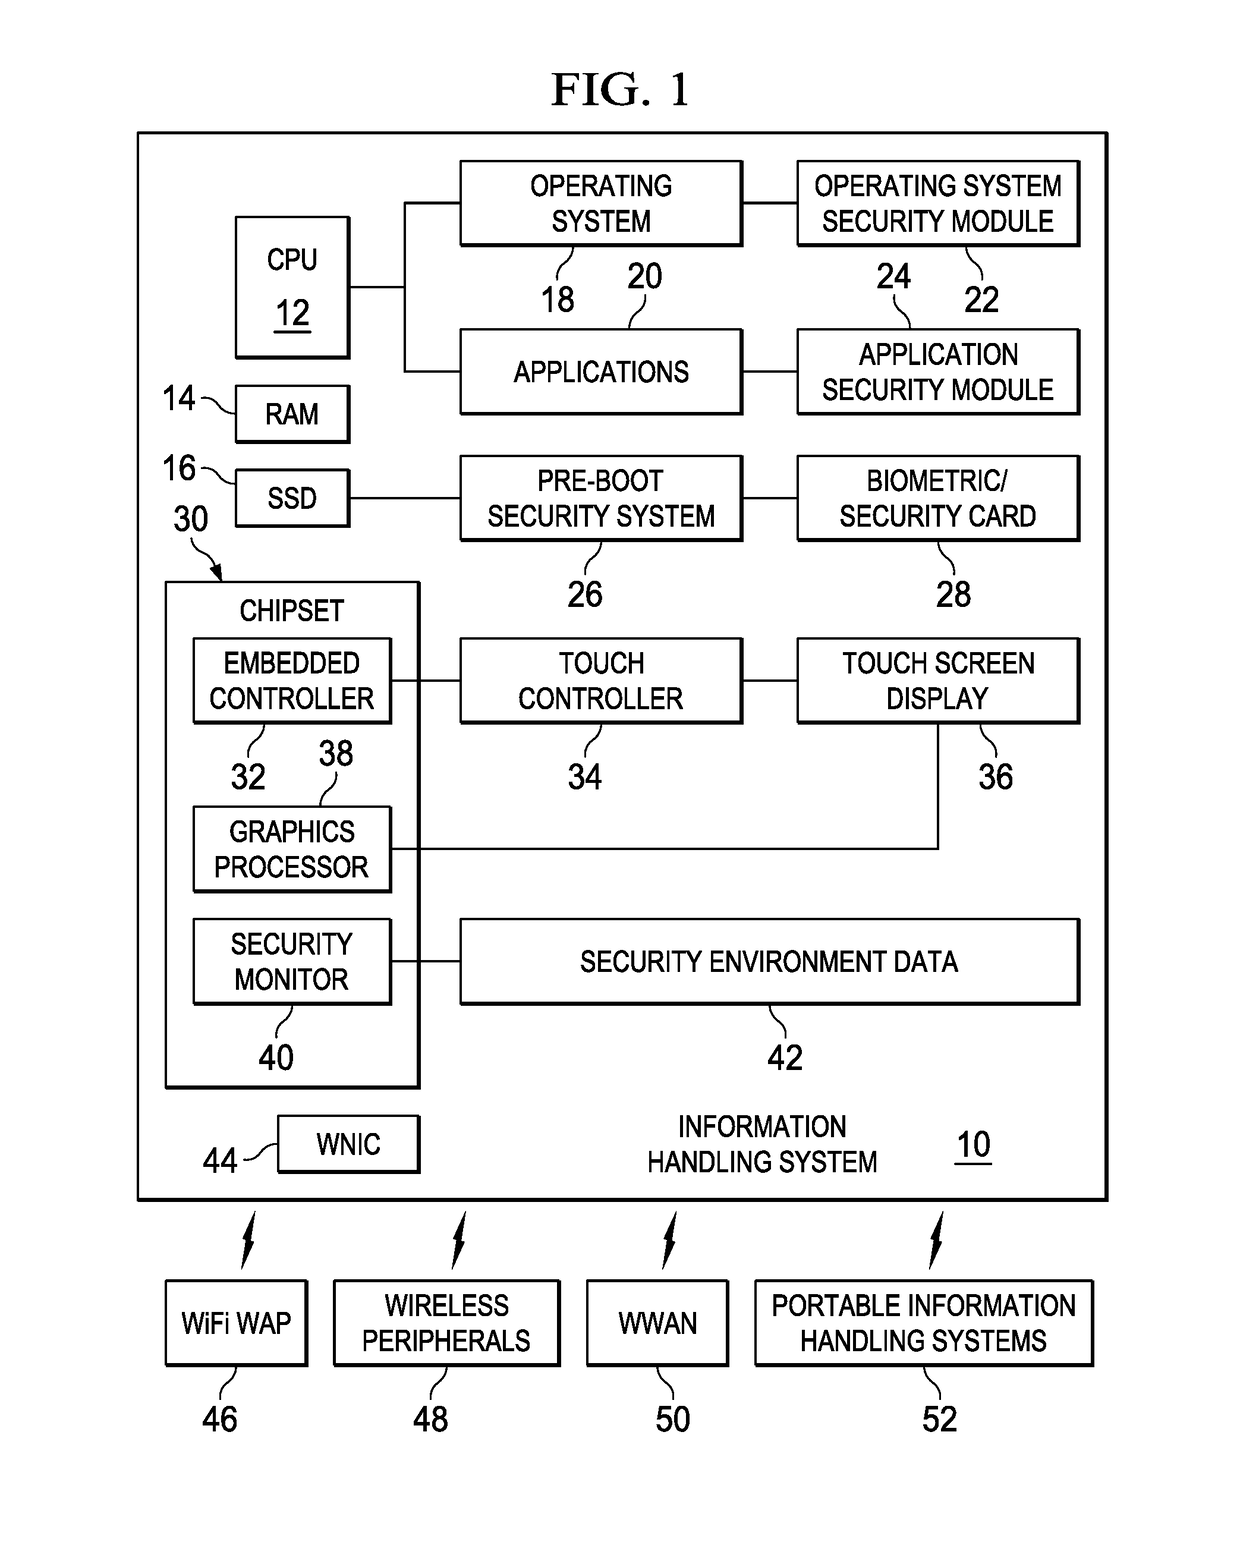 Information Handling System Multi-Touch Security System